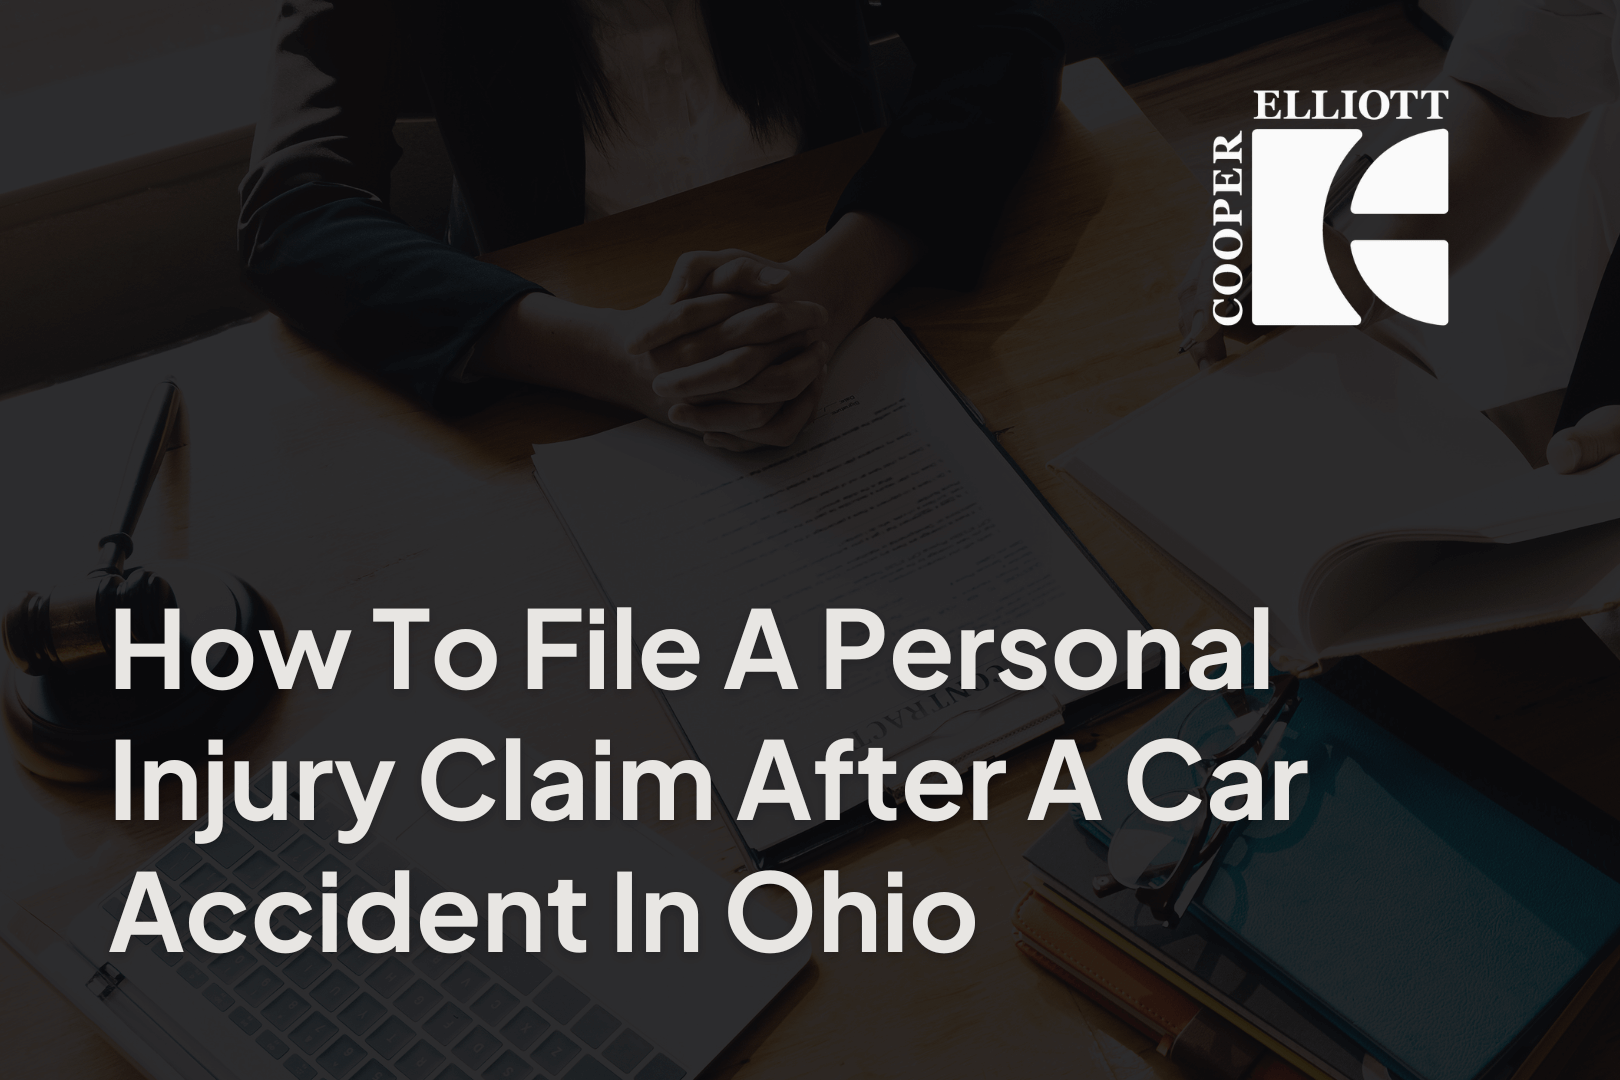 How To File A Personal Injury Claim After A Car Accident In Ohio - cooper elliott ohio